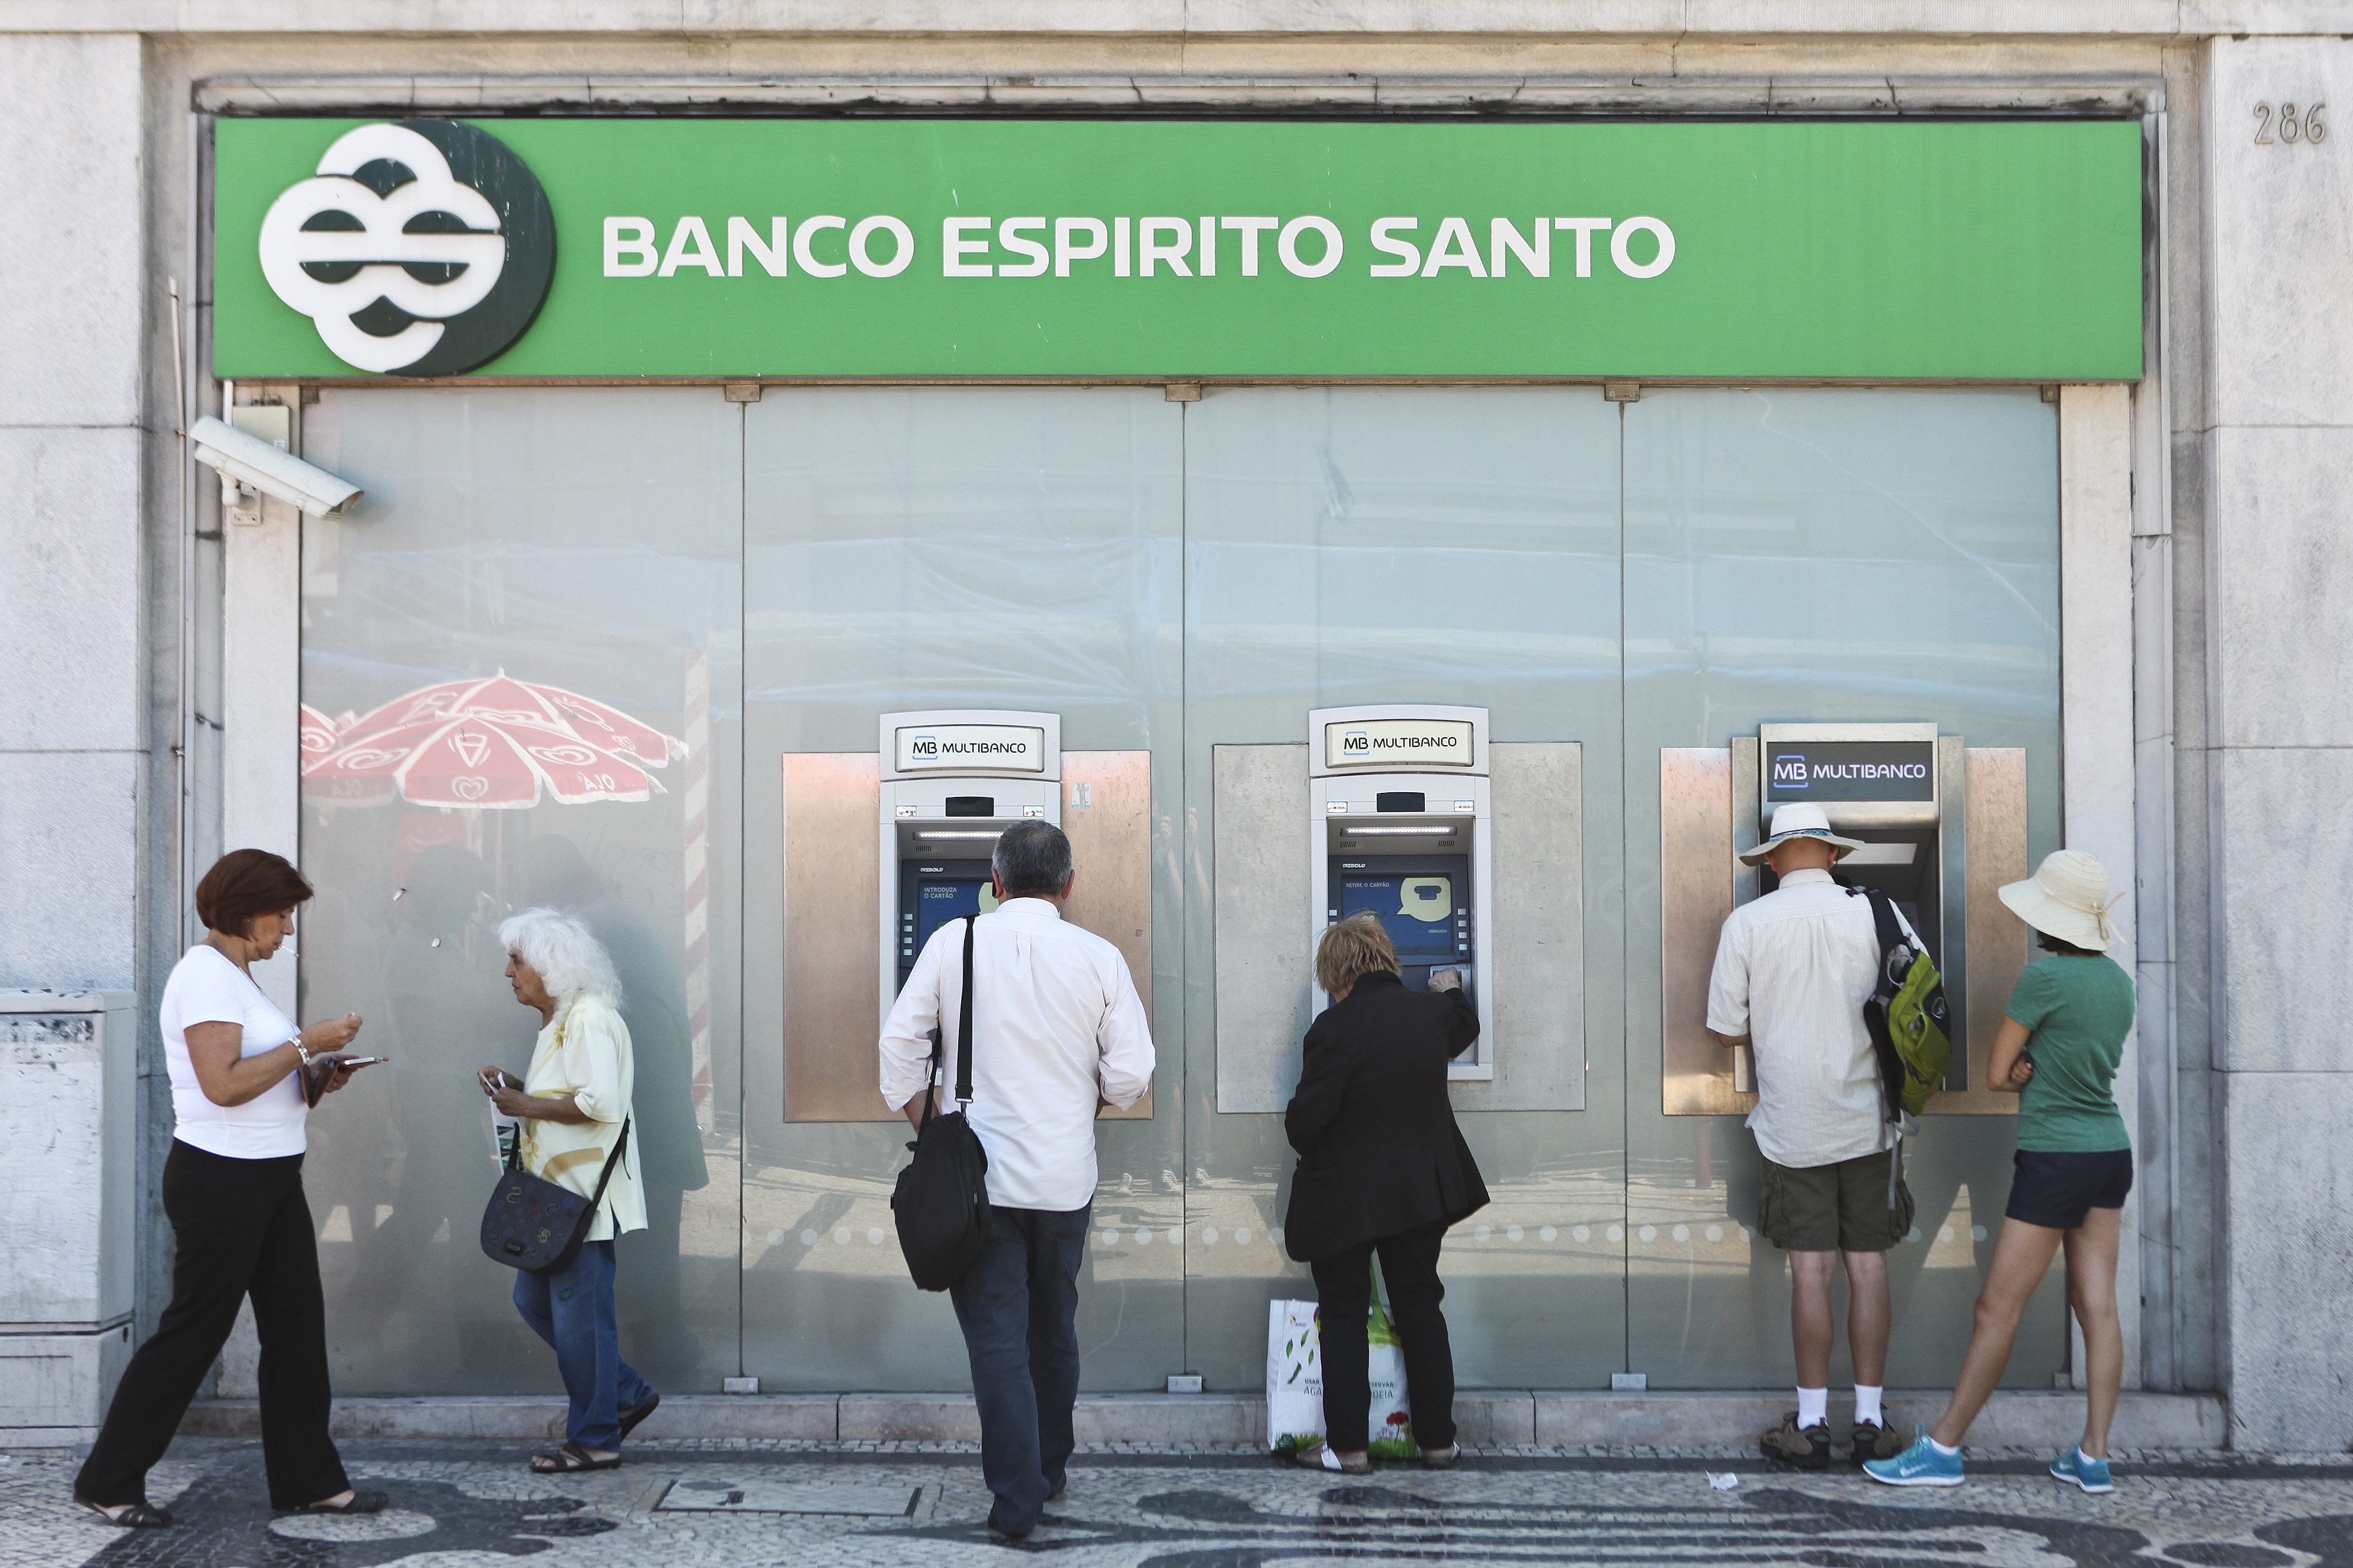 Espirito Santo Financial Group, the largest shareholder in Banco Espirito Santo, suspended trading in its shares and bonds, citing "material difficulties" at parent company ESI. Photo: EPA